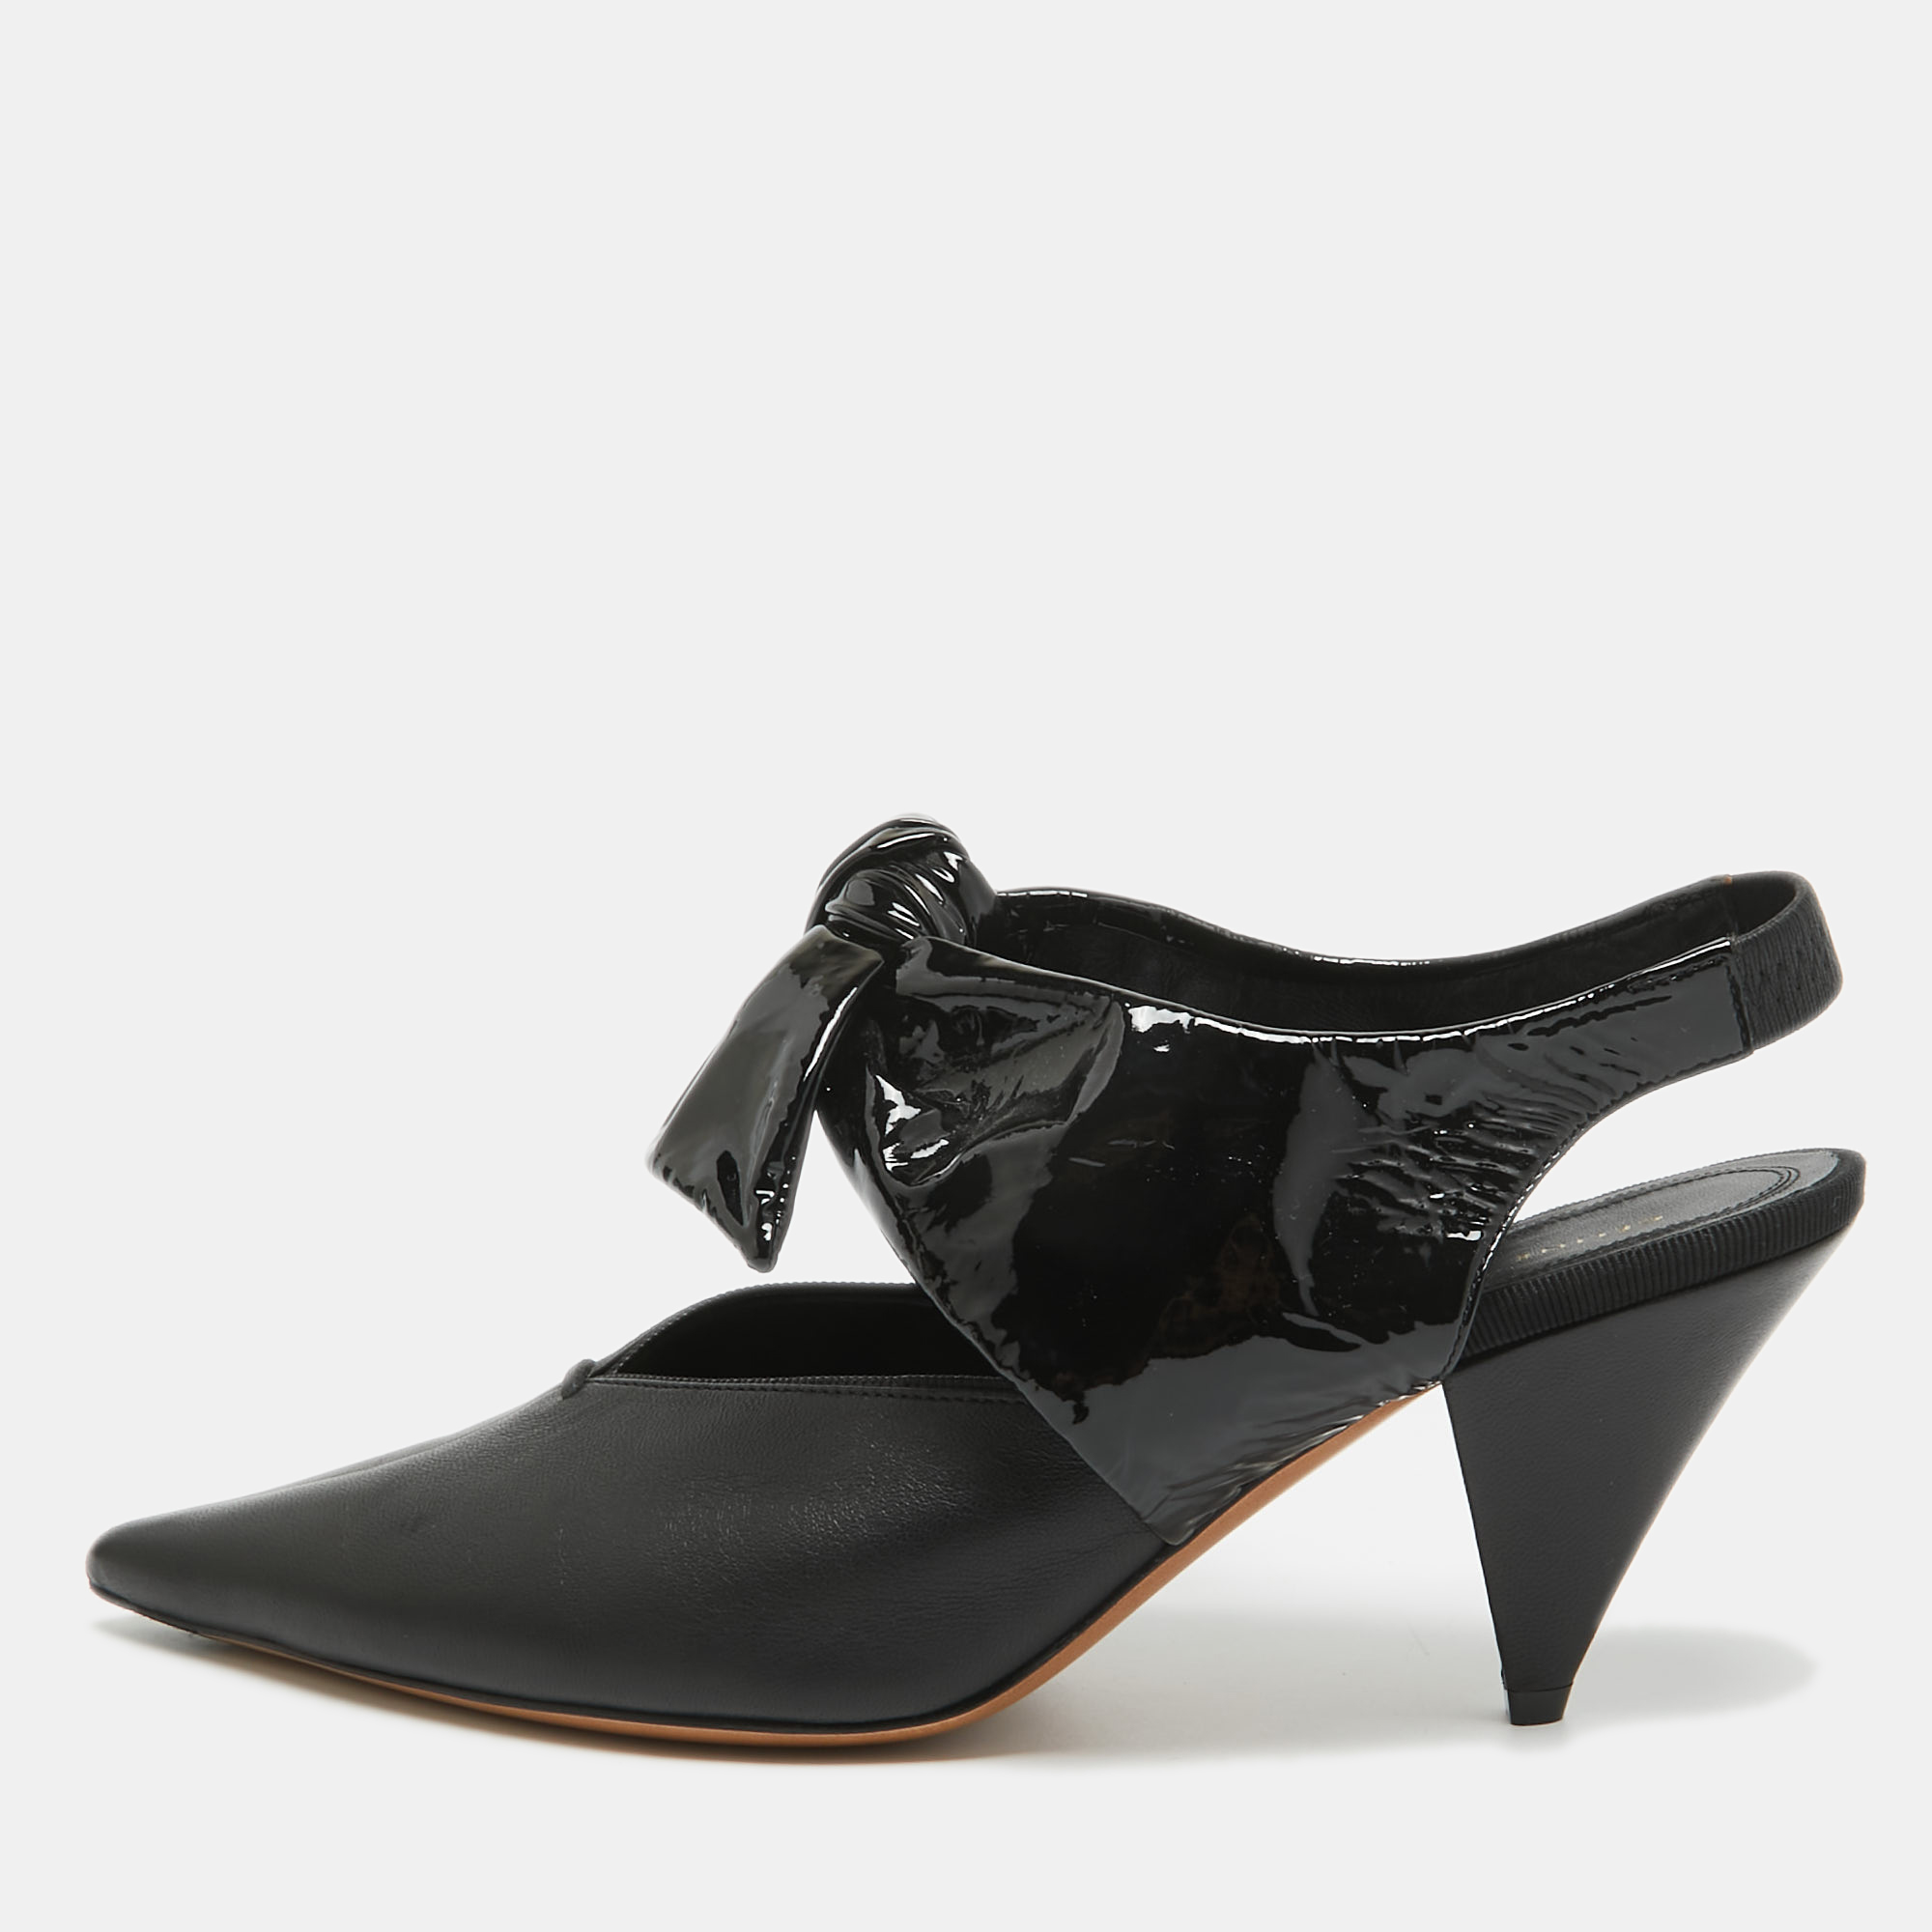 

Celine Black Leather and Patent Bow Slingback Pumps Size